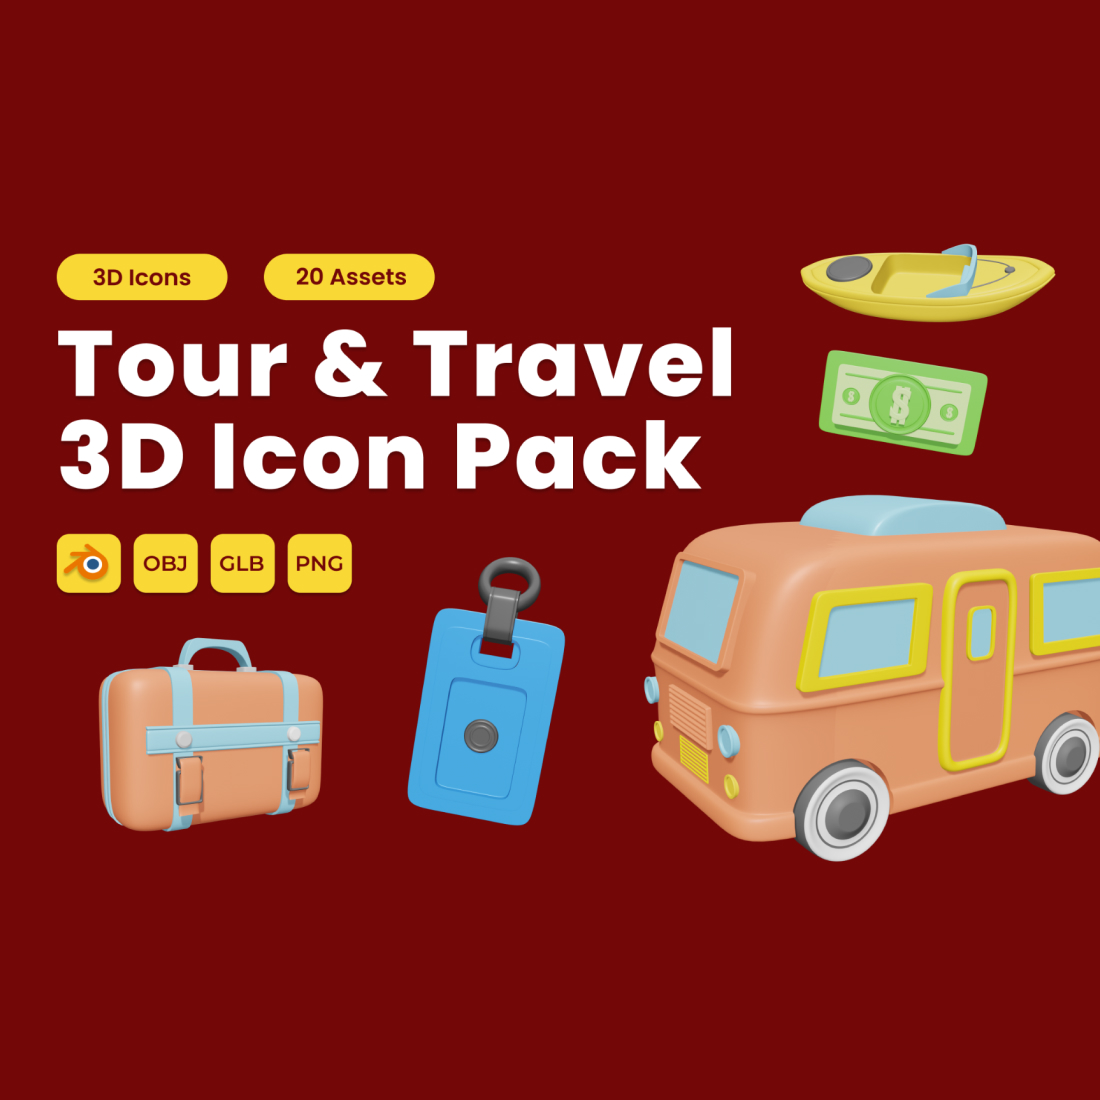 Tour and Travel 3D Icon Pack Vol 2 preview image.